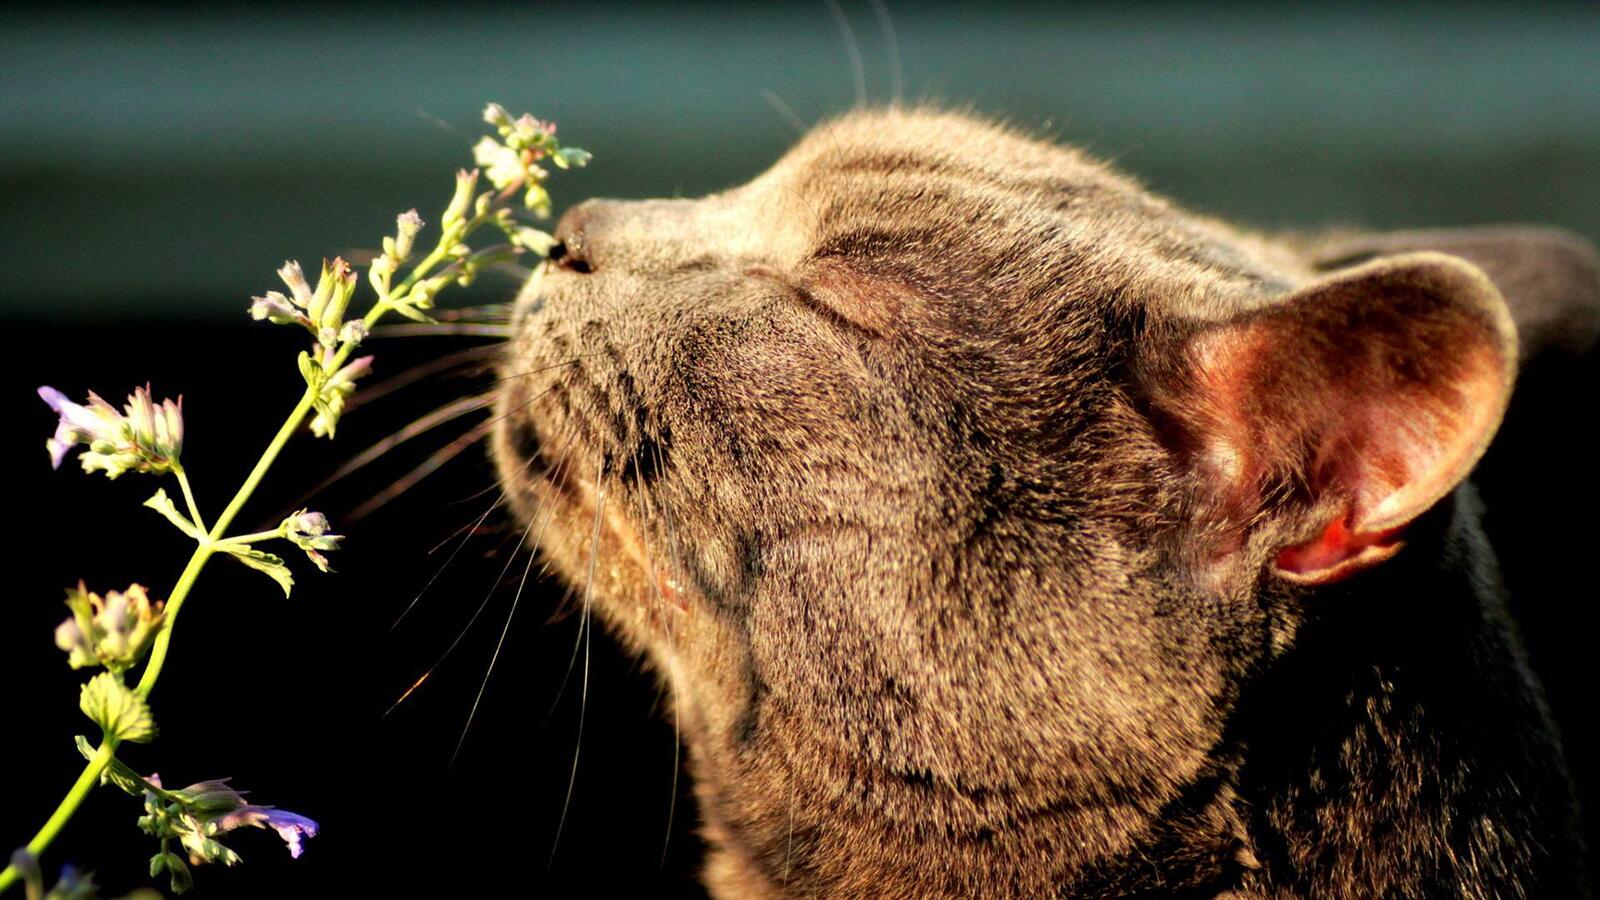 Wallpapers cat sniffing the flower the pleasure the nose on the desktop